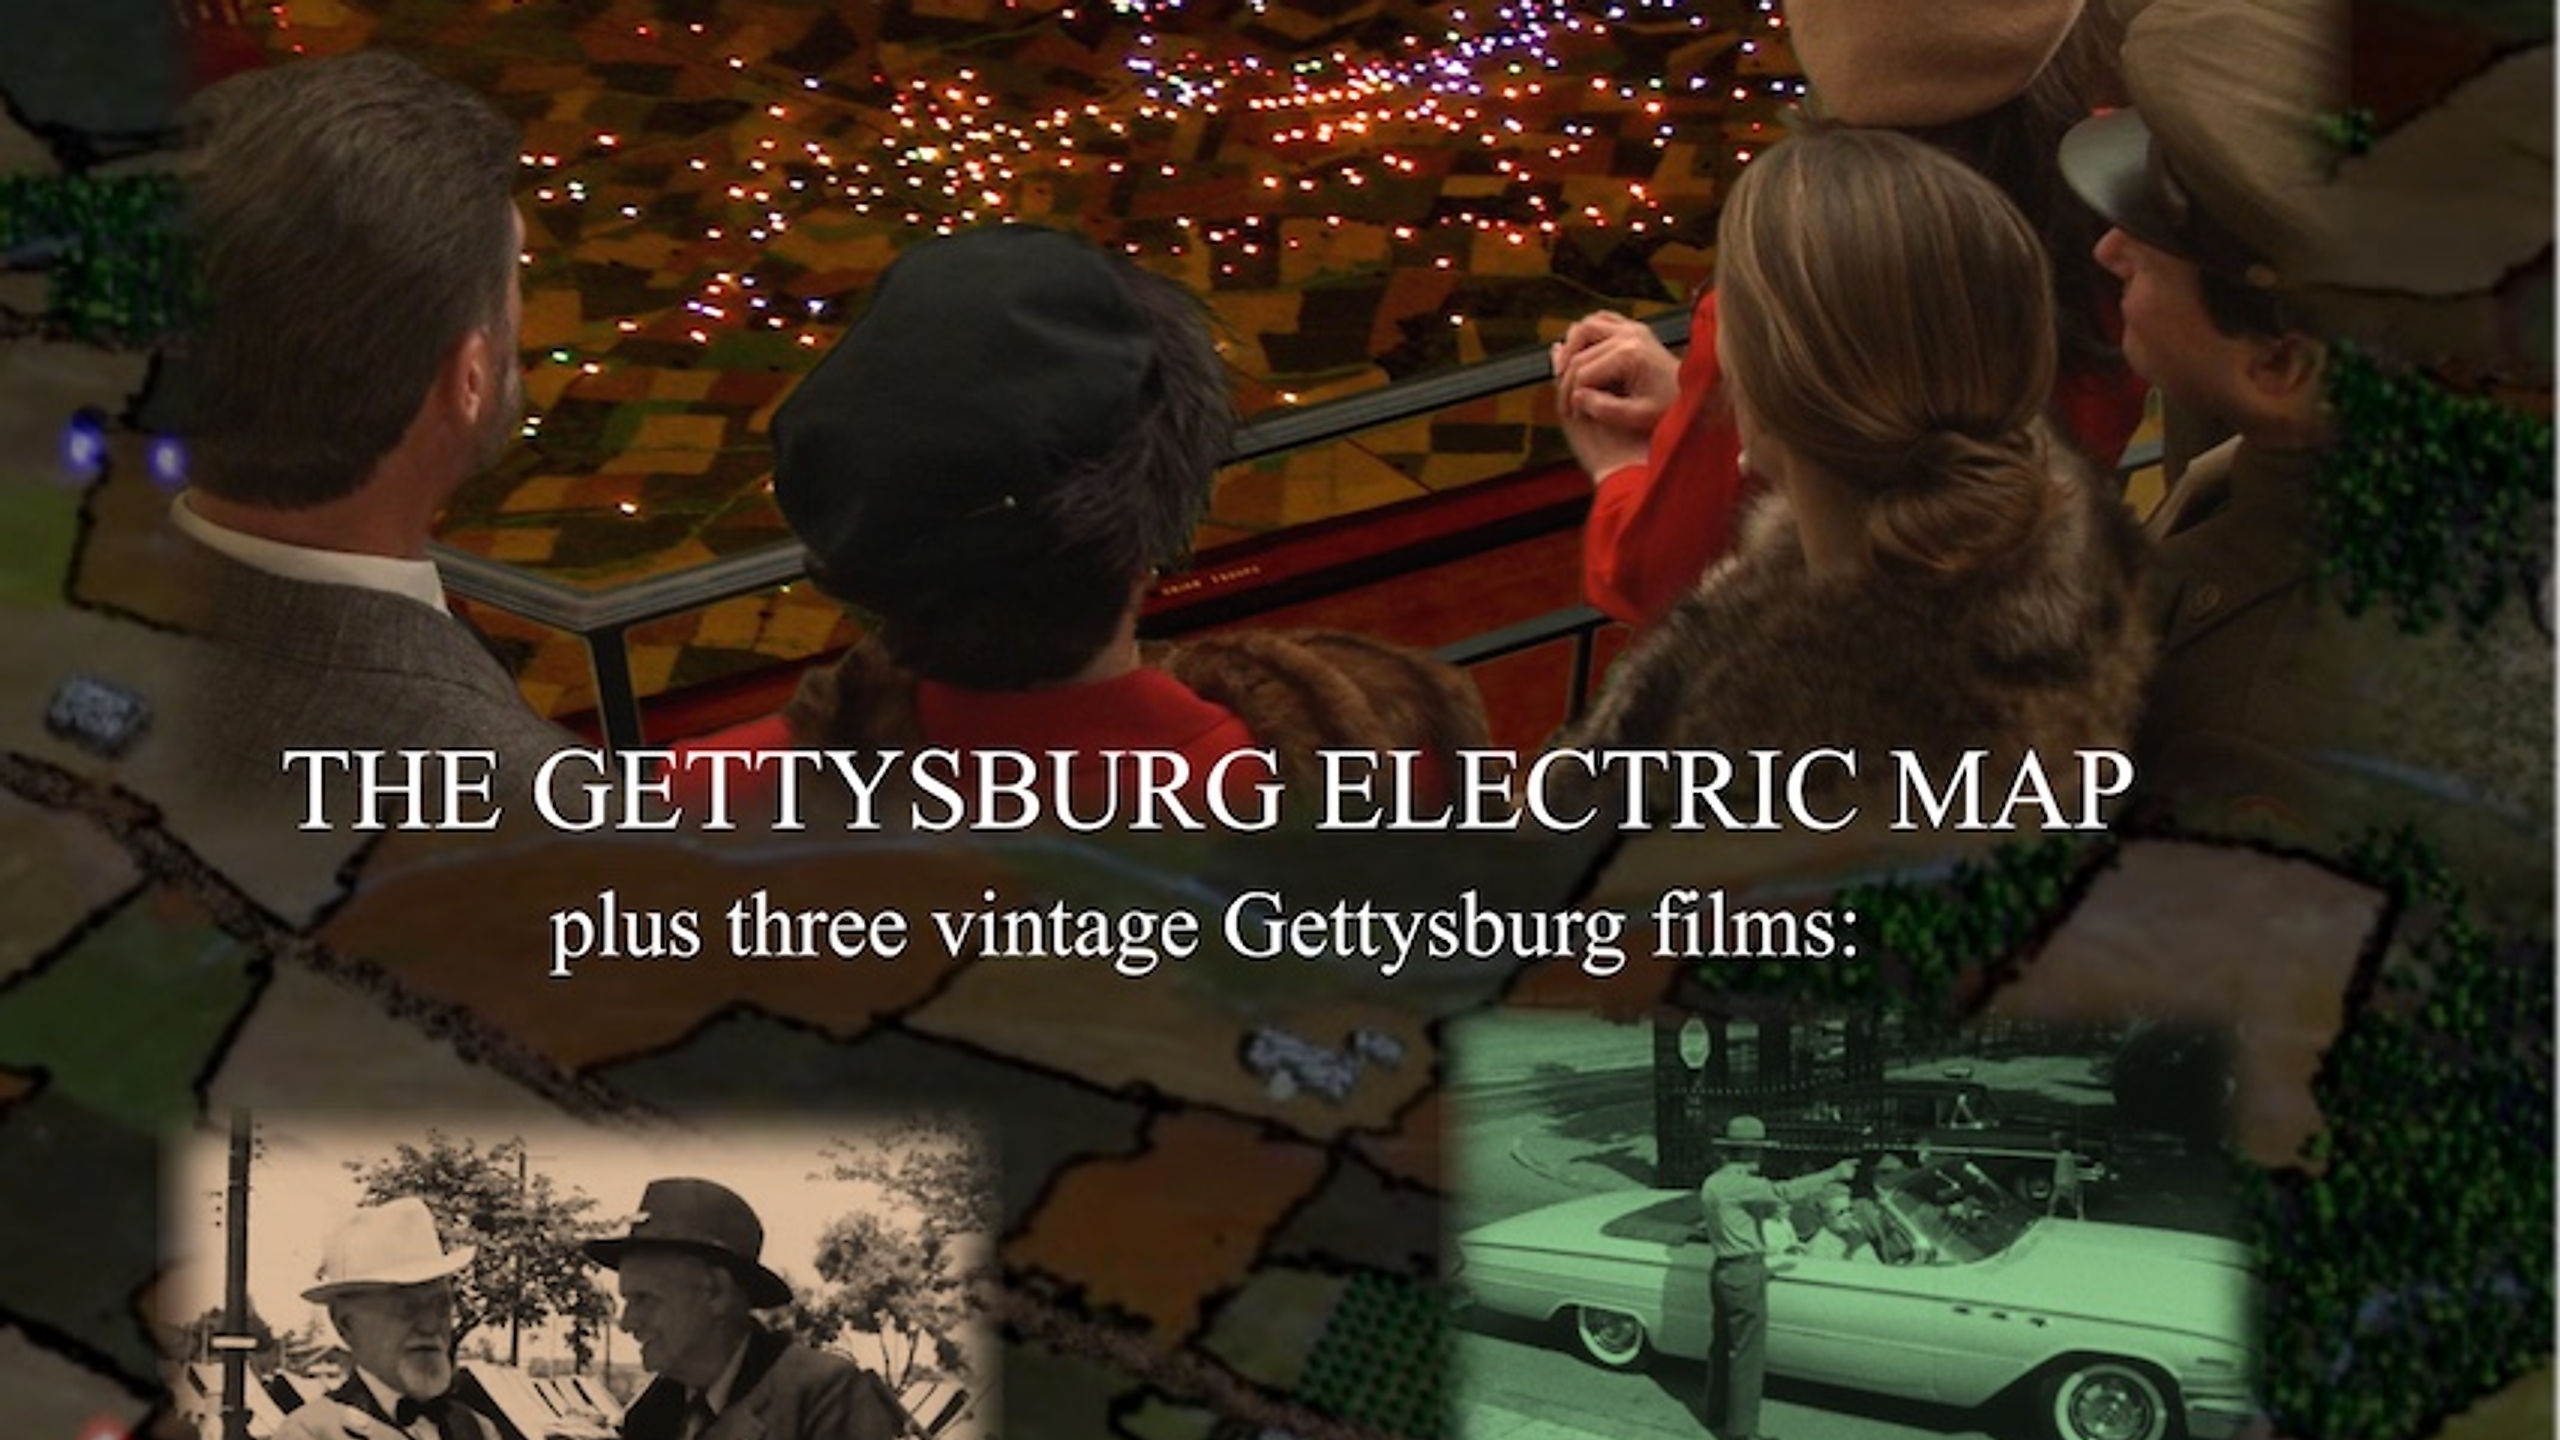 The Gettysburg Electric Map